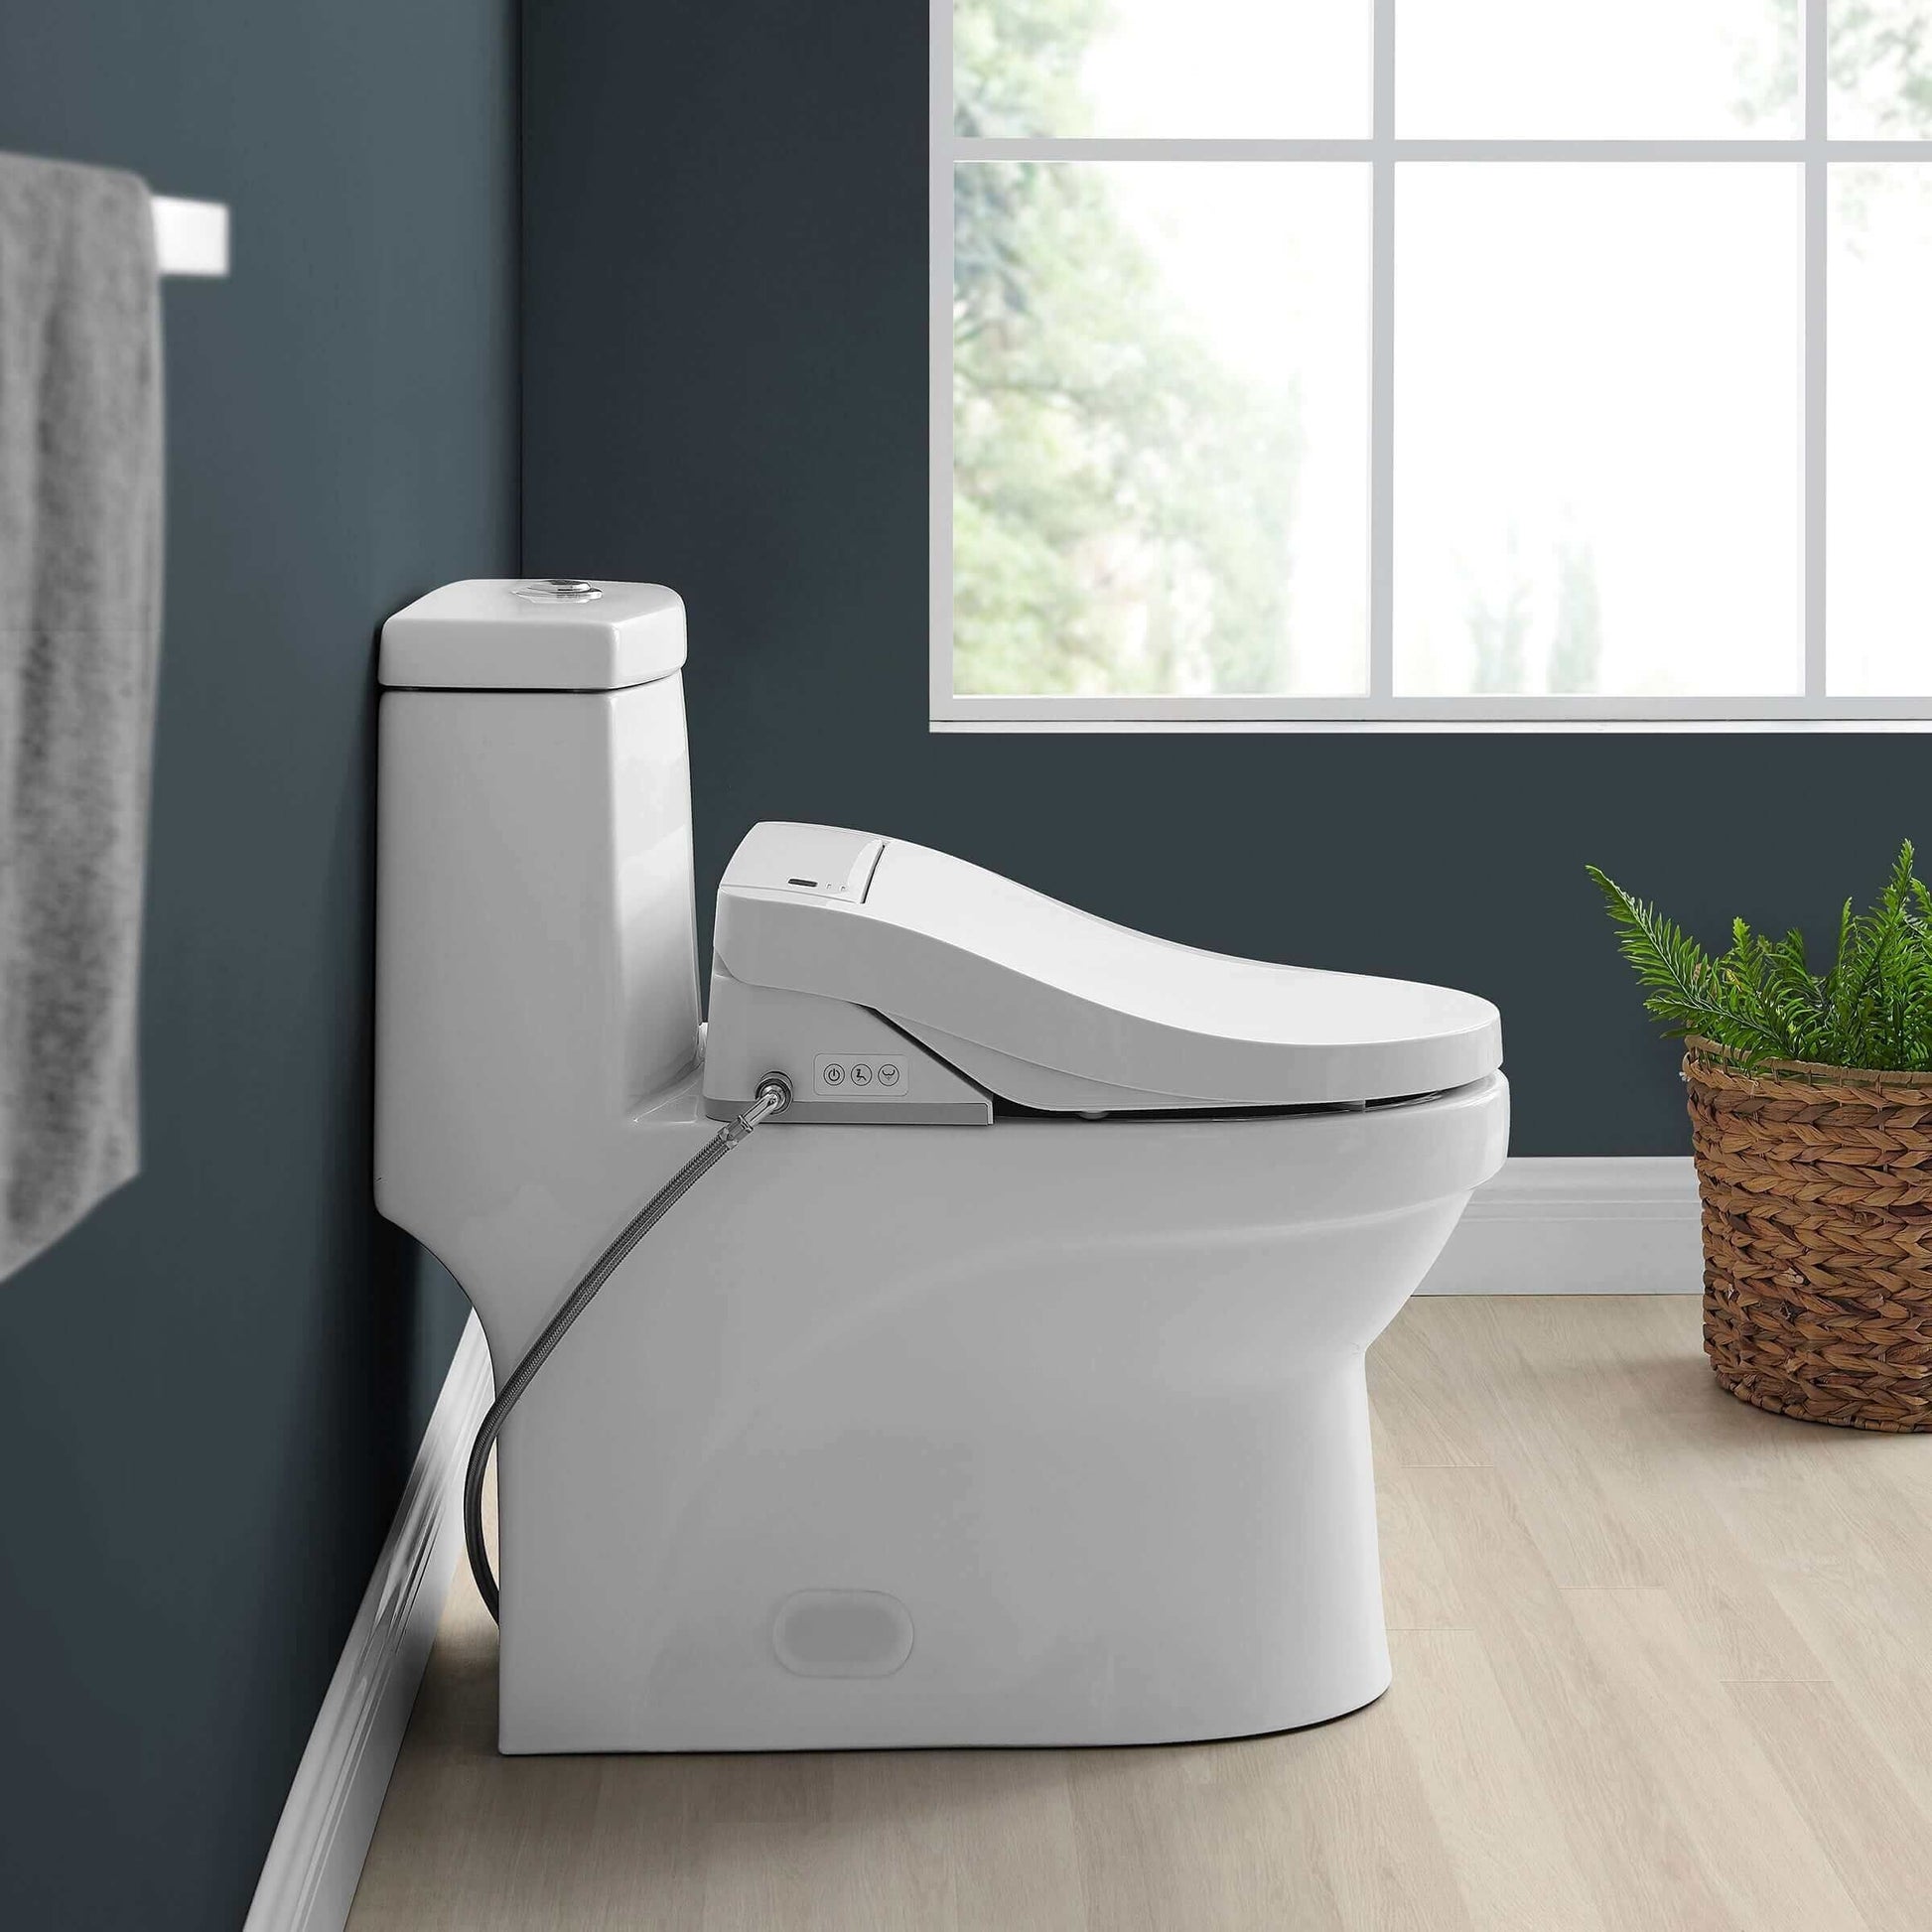 Vivante Smart Toilet Seat Bidet - side view attached to a toilet in a bathroom